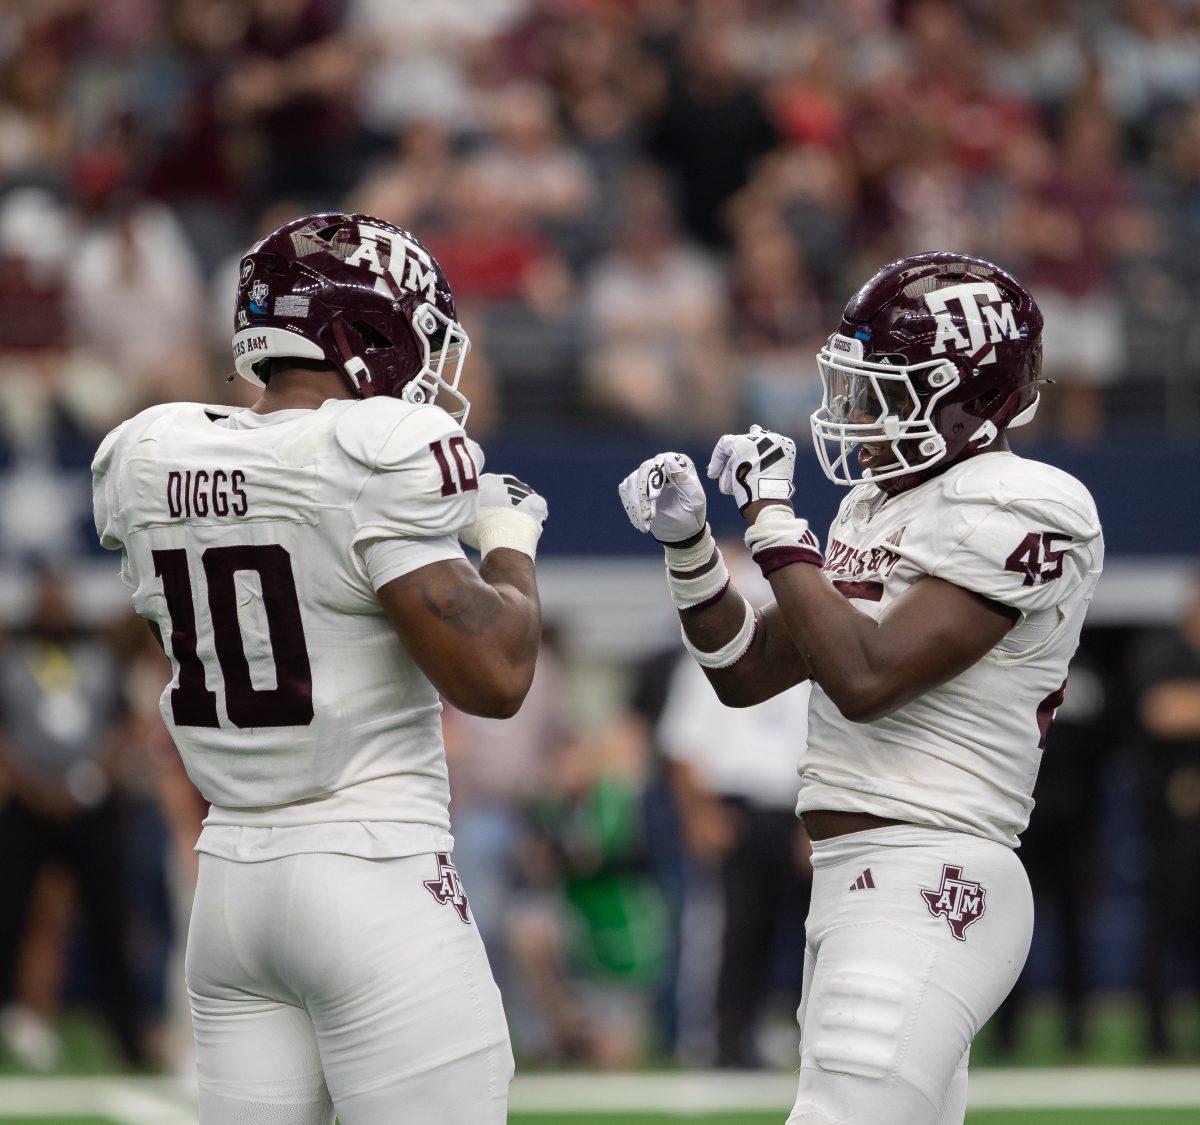 Junior DL Fadil Diggs (10) and junior LB Edgerrin Cooper (45) celebrate after making a sack during the Southwest Classic against Arkansas on Saturday, Sept. 30, 2023. (Kyle Heise/The Battalion)